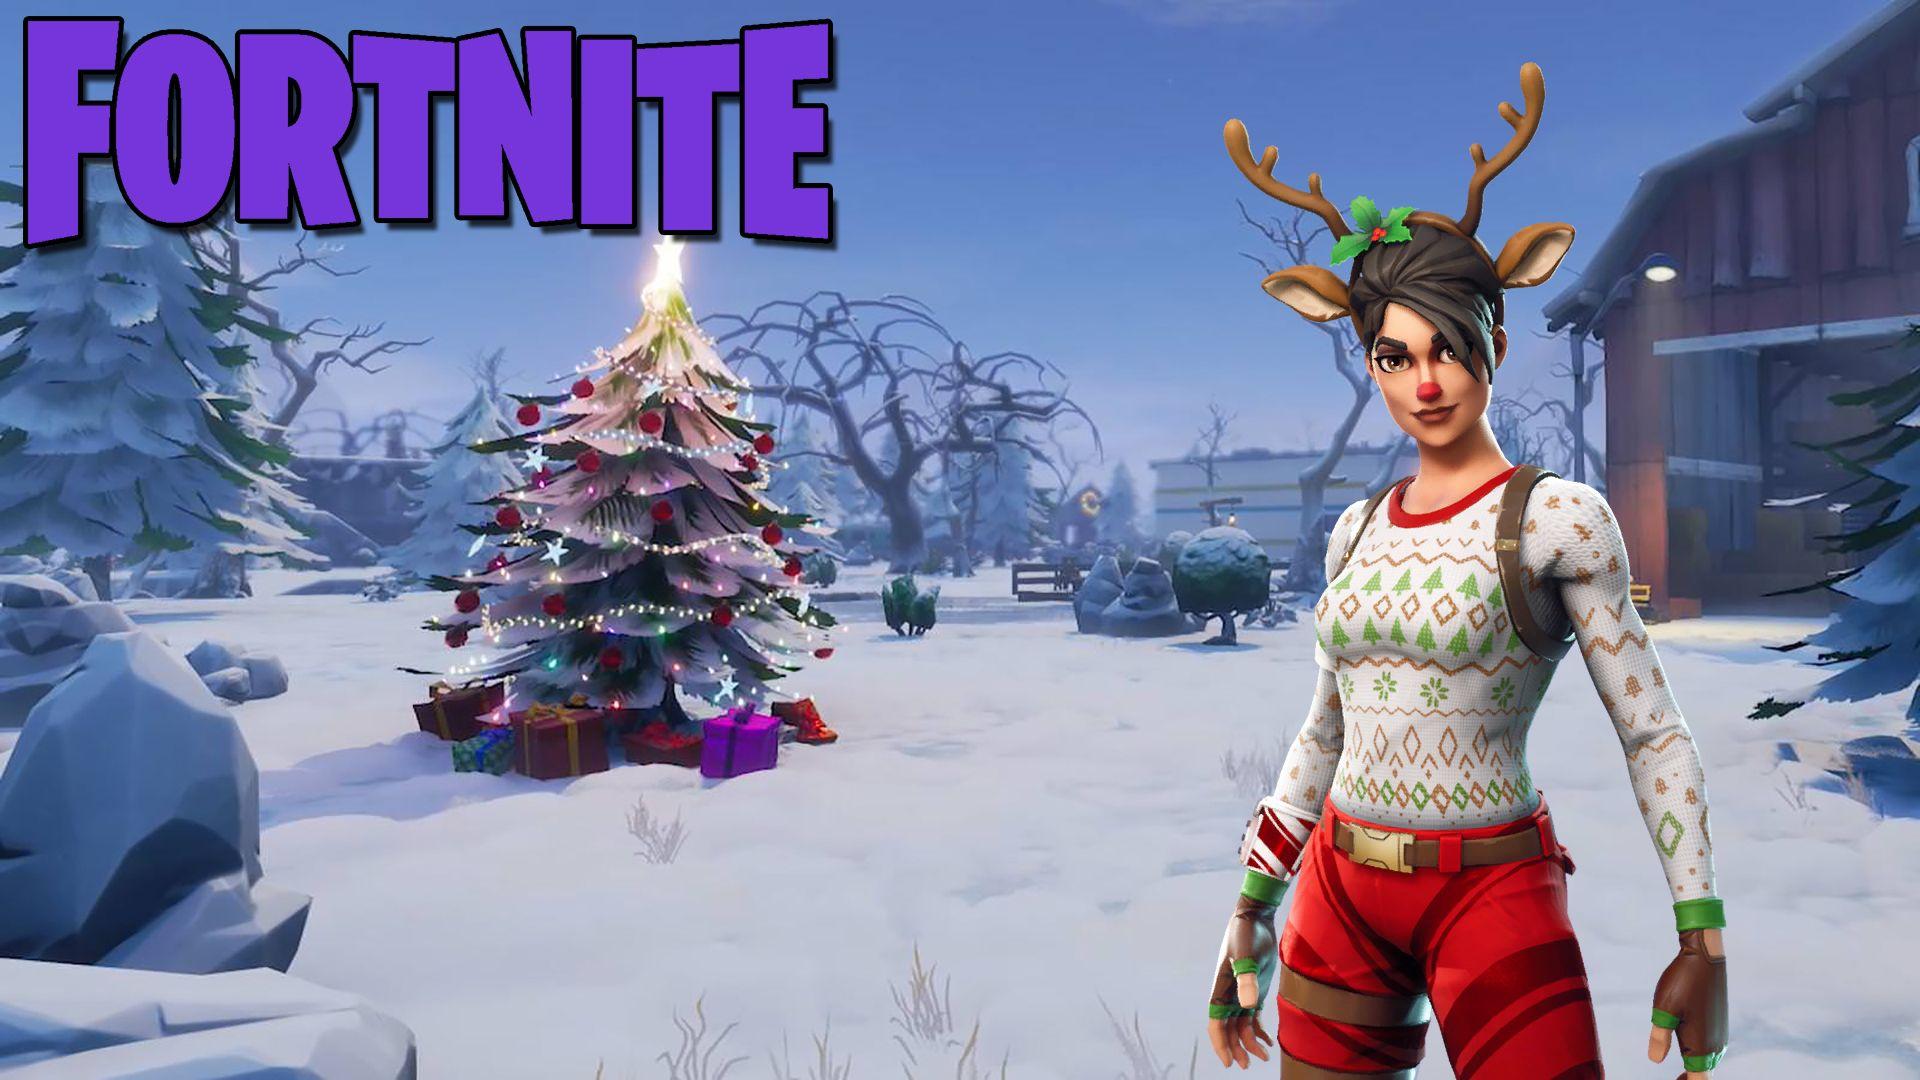 1920x1080 red nosed raider fortnite outfit skin how to get news fortnite watch - renegade raider fortnite wallpaper